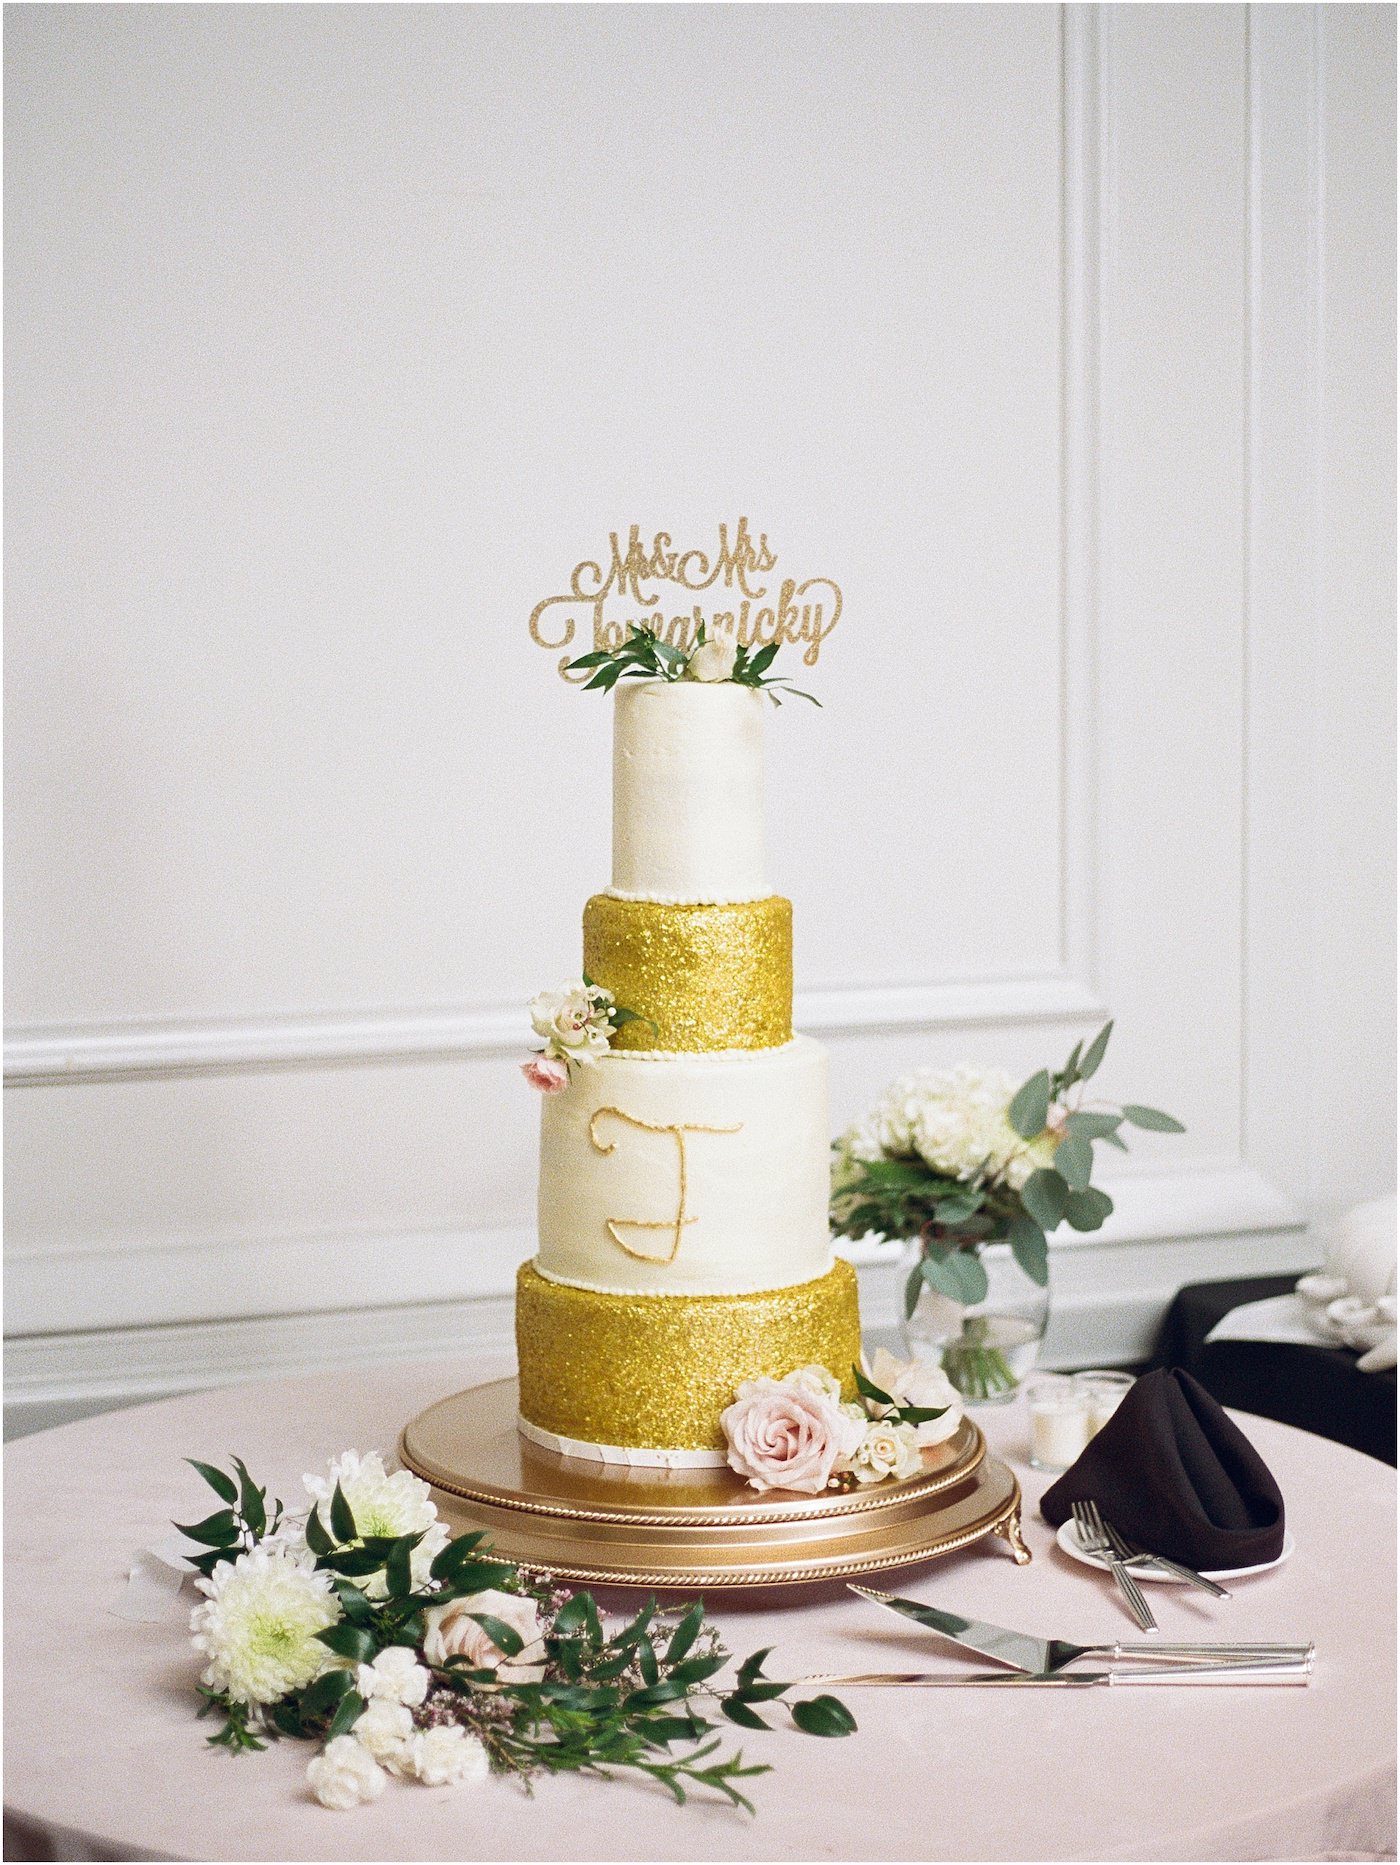 Four Tier Wedding Cake with Gold Glitter and Fresh Floral Accents topped with Gold Die Cut Name Topper